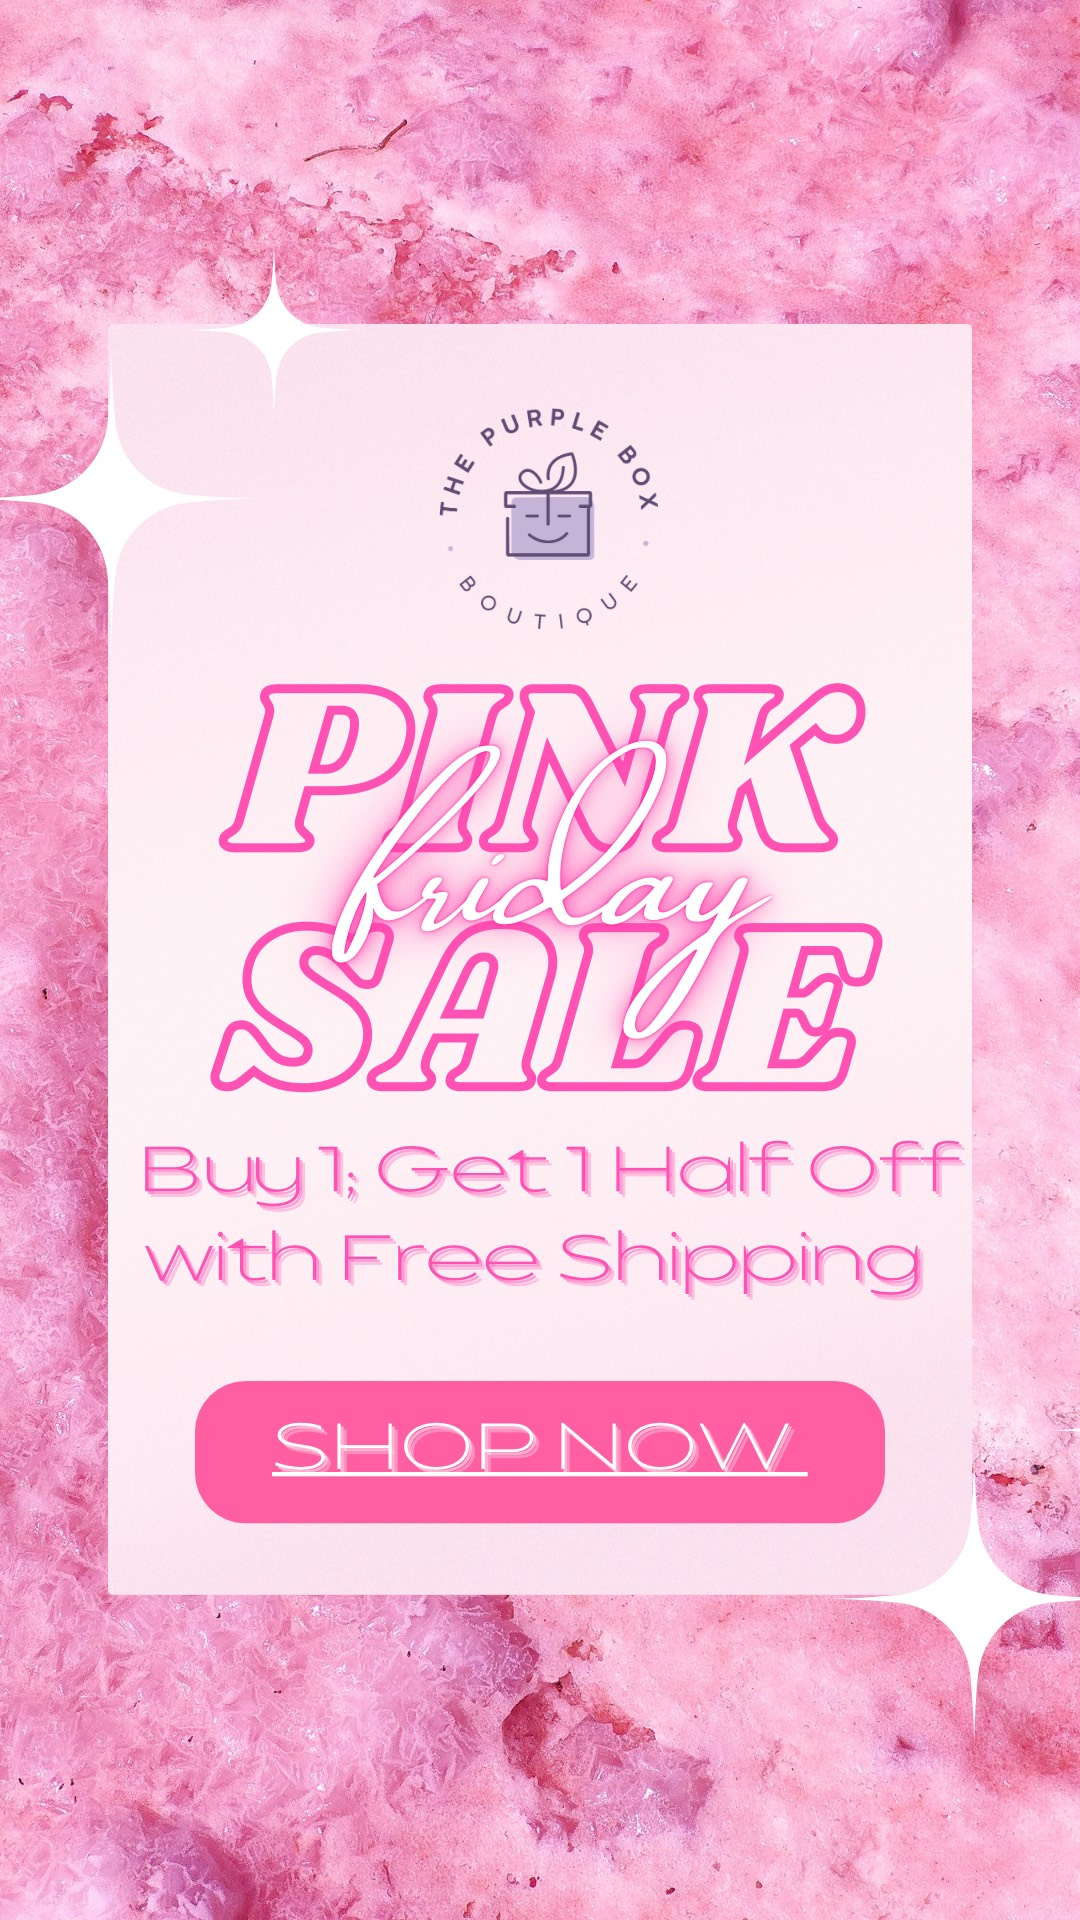 PINK FRIDAY SALES EVENT